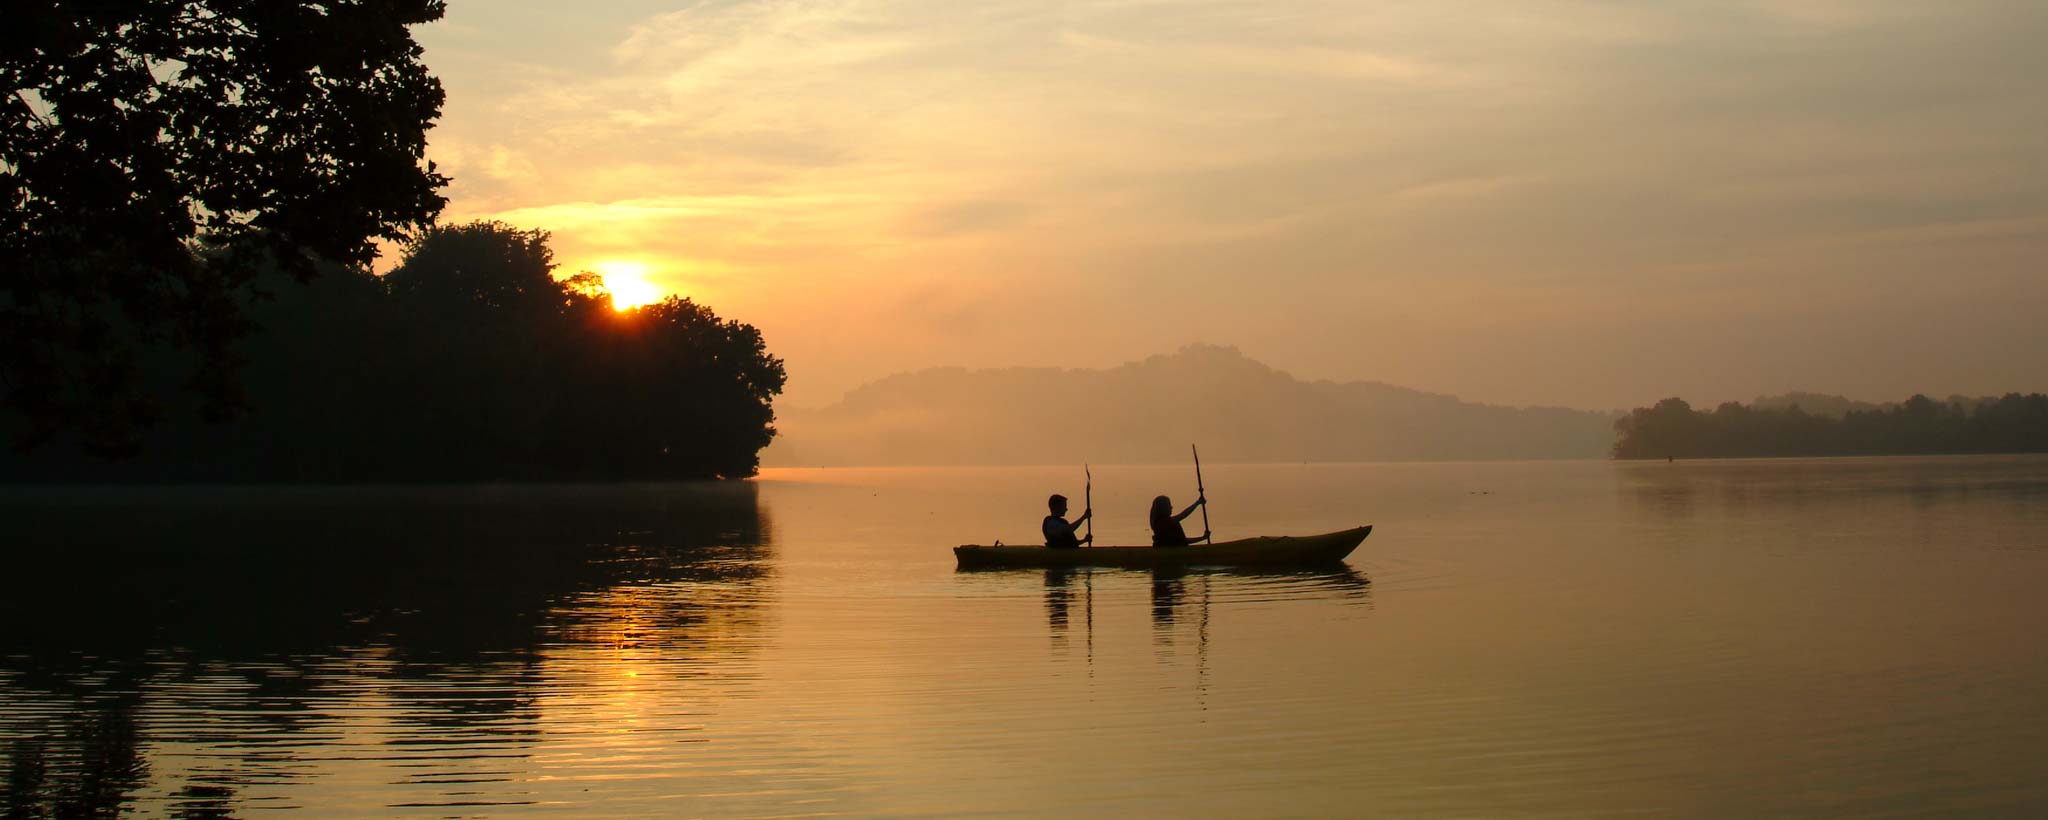 Two people canoeing on a lake at sunset